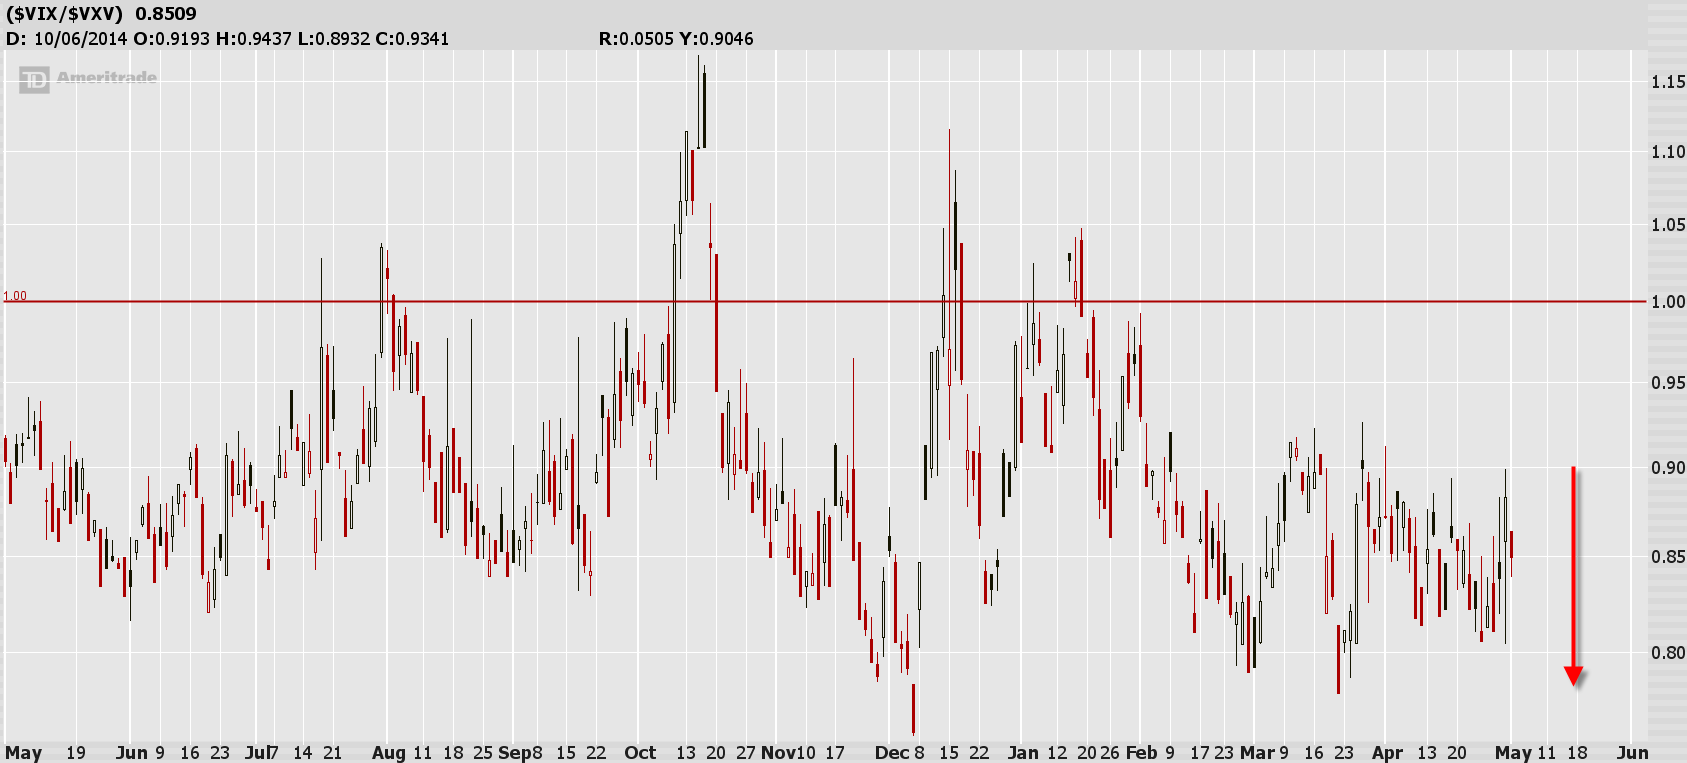 Compare VIX to VXV to look for volatility extremes (high or low)